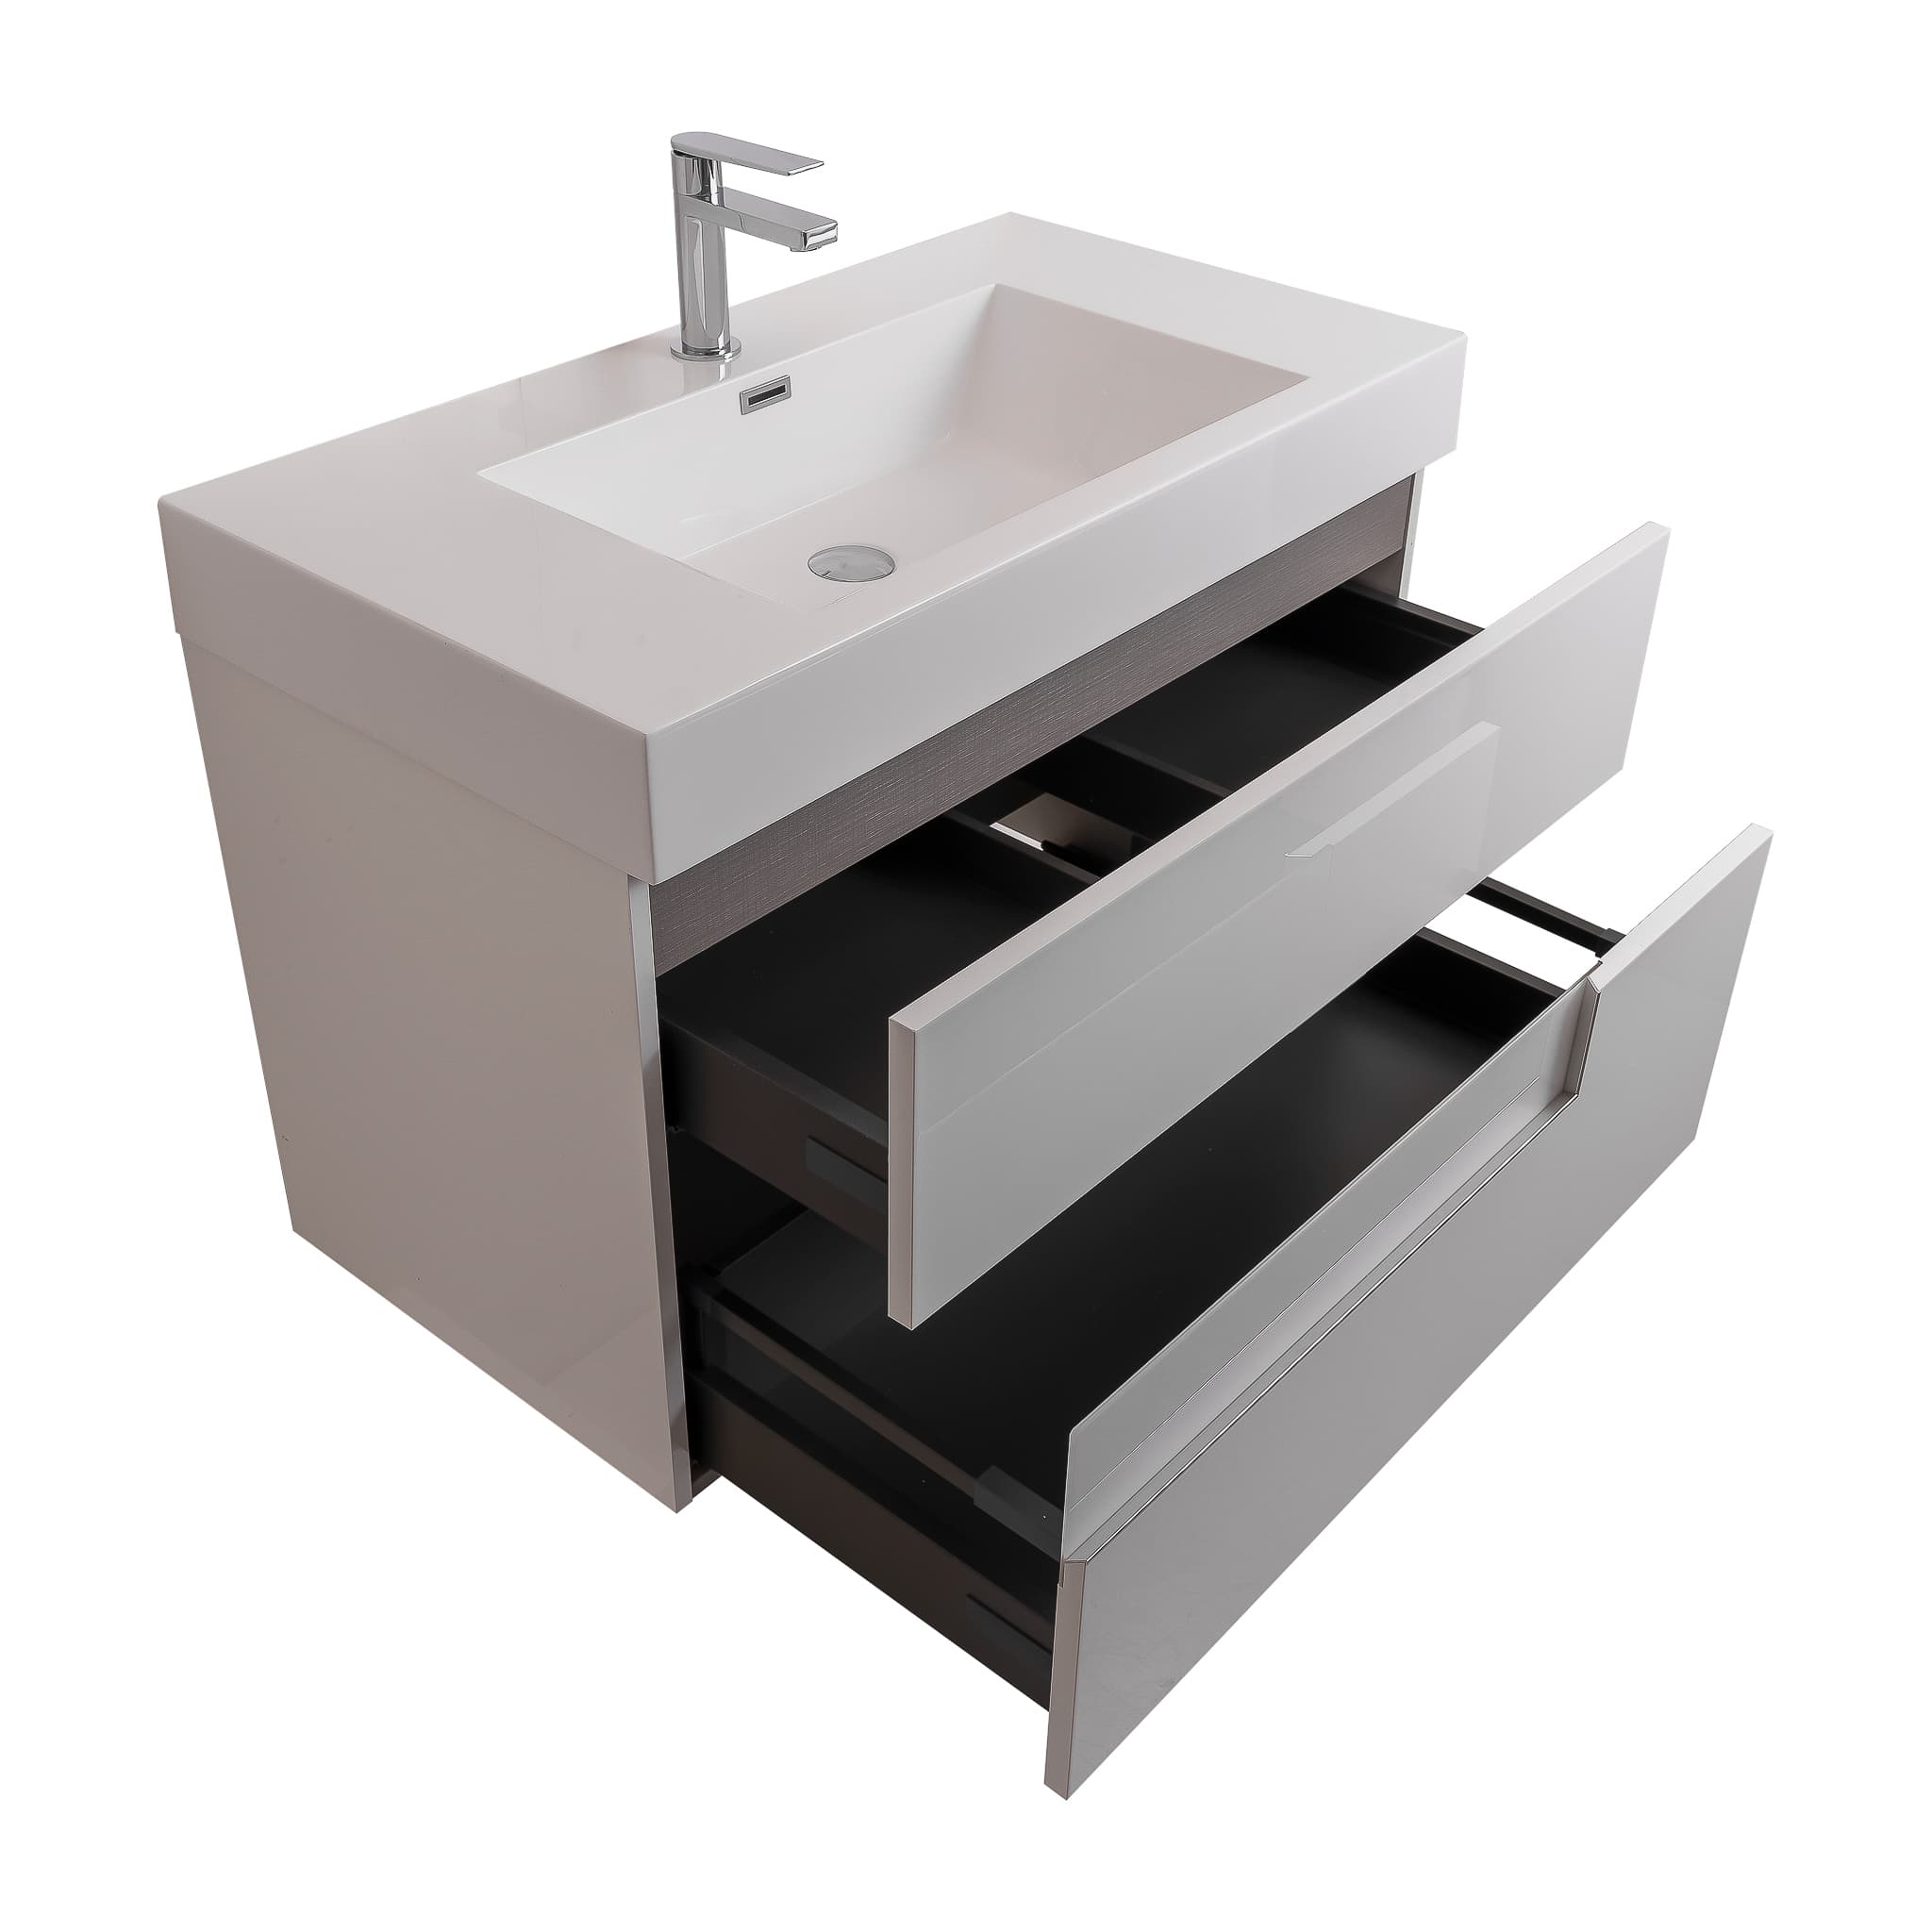 Vision 31.5 White High Gloss Cabinet, Square Cultured Marble Sink, Wall Mounted Modern Vanity Set